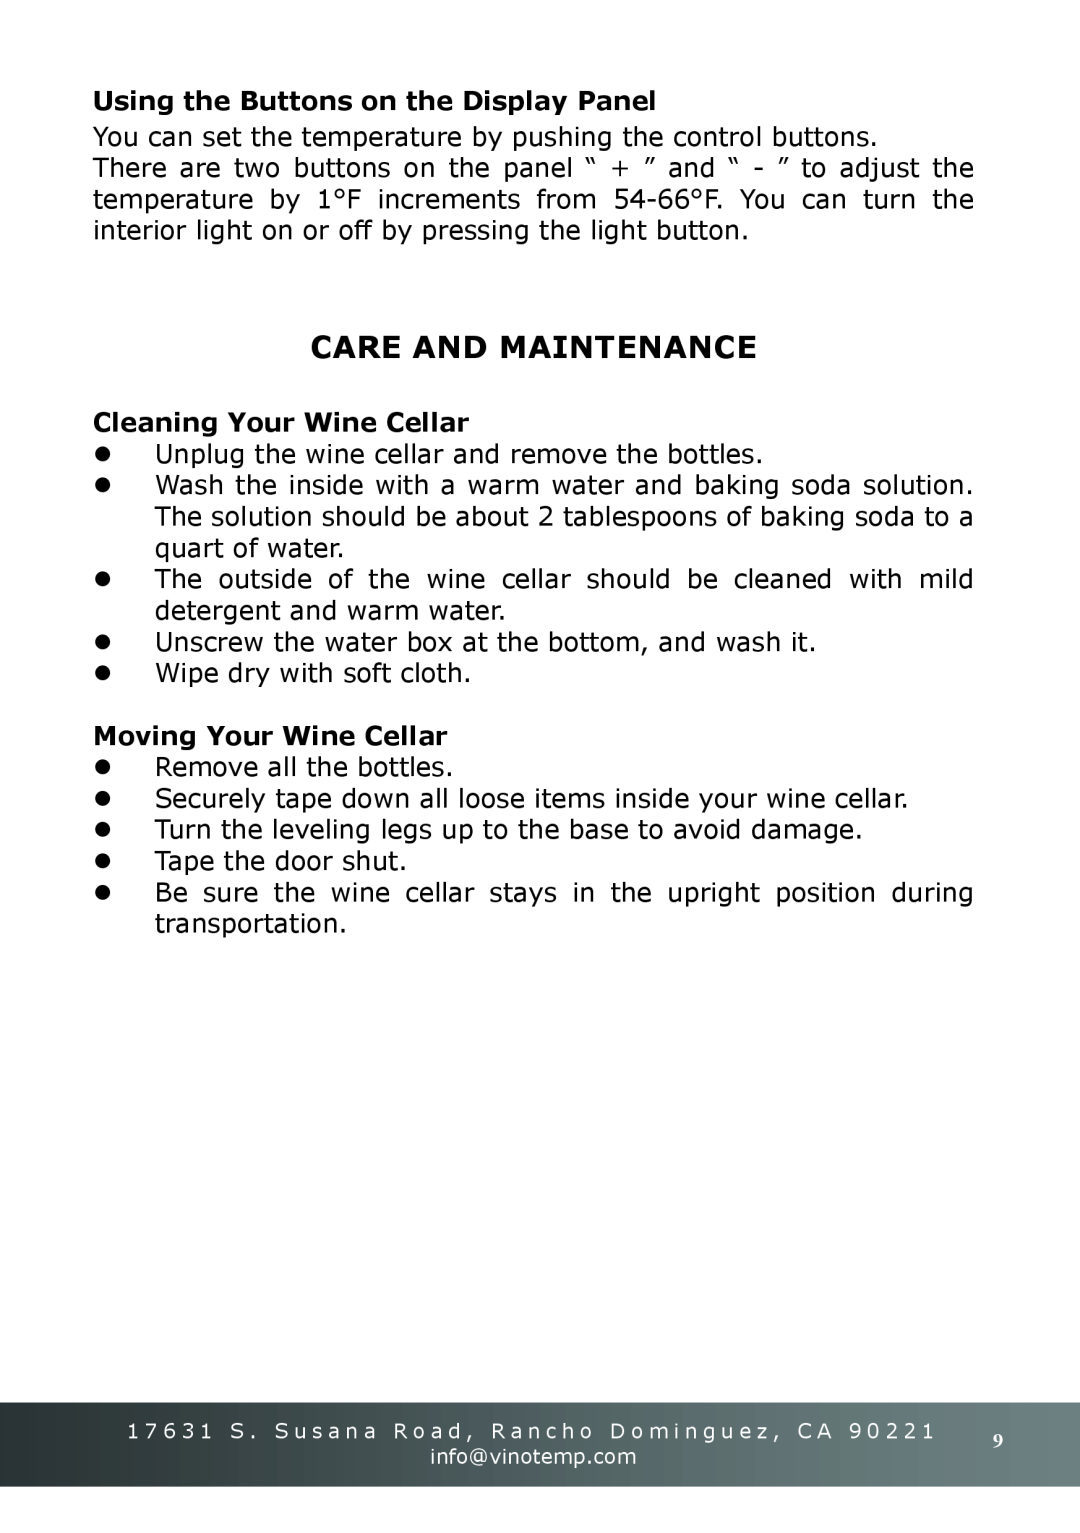 Vinotemp VT-18TEDS owner manual Care And Maintenance, Using the Buttons on the Display Panel, Cleaning Your Wine Cellar 